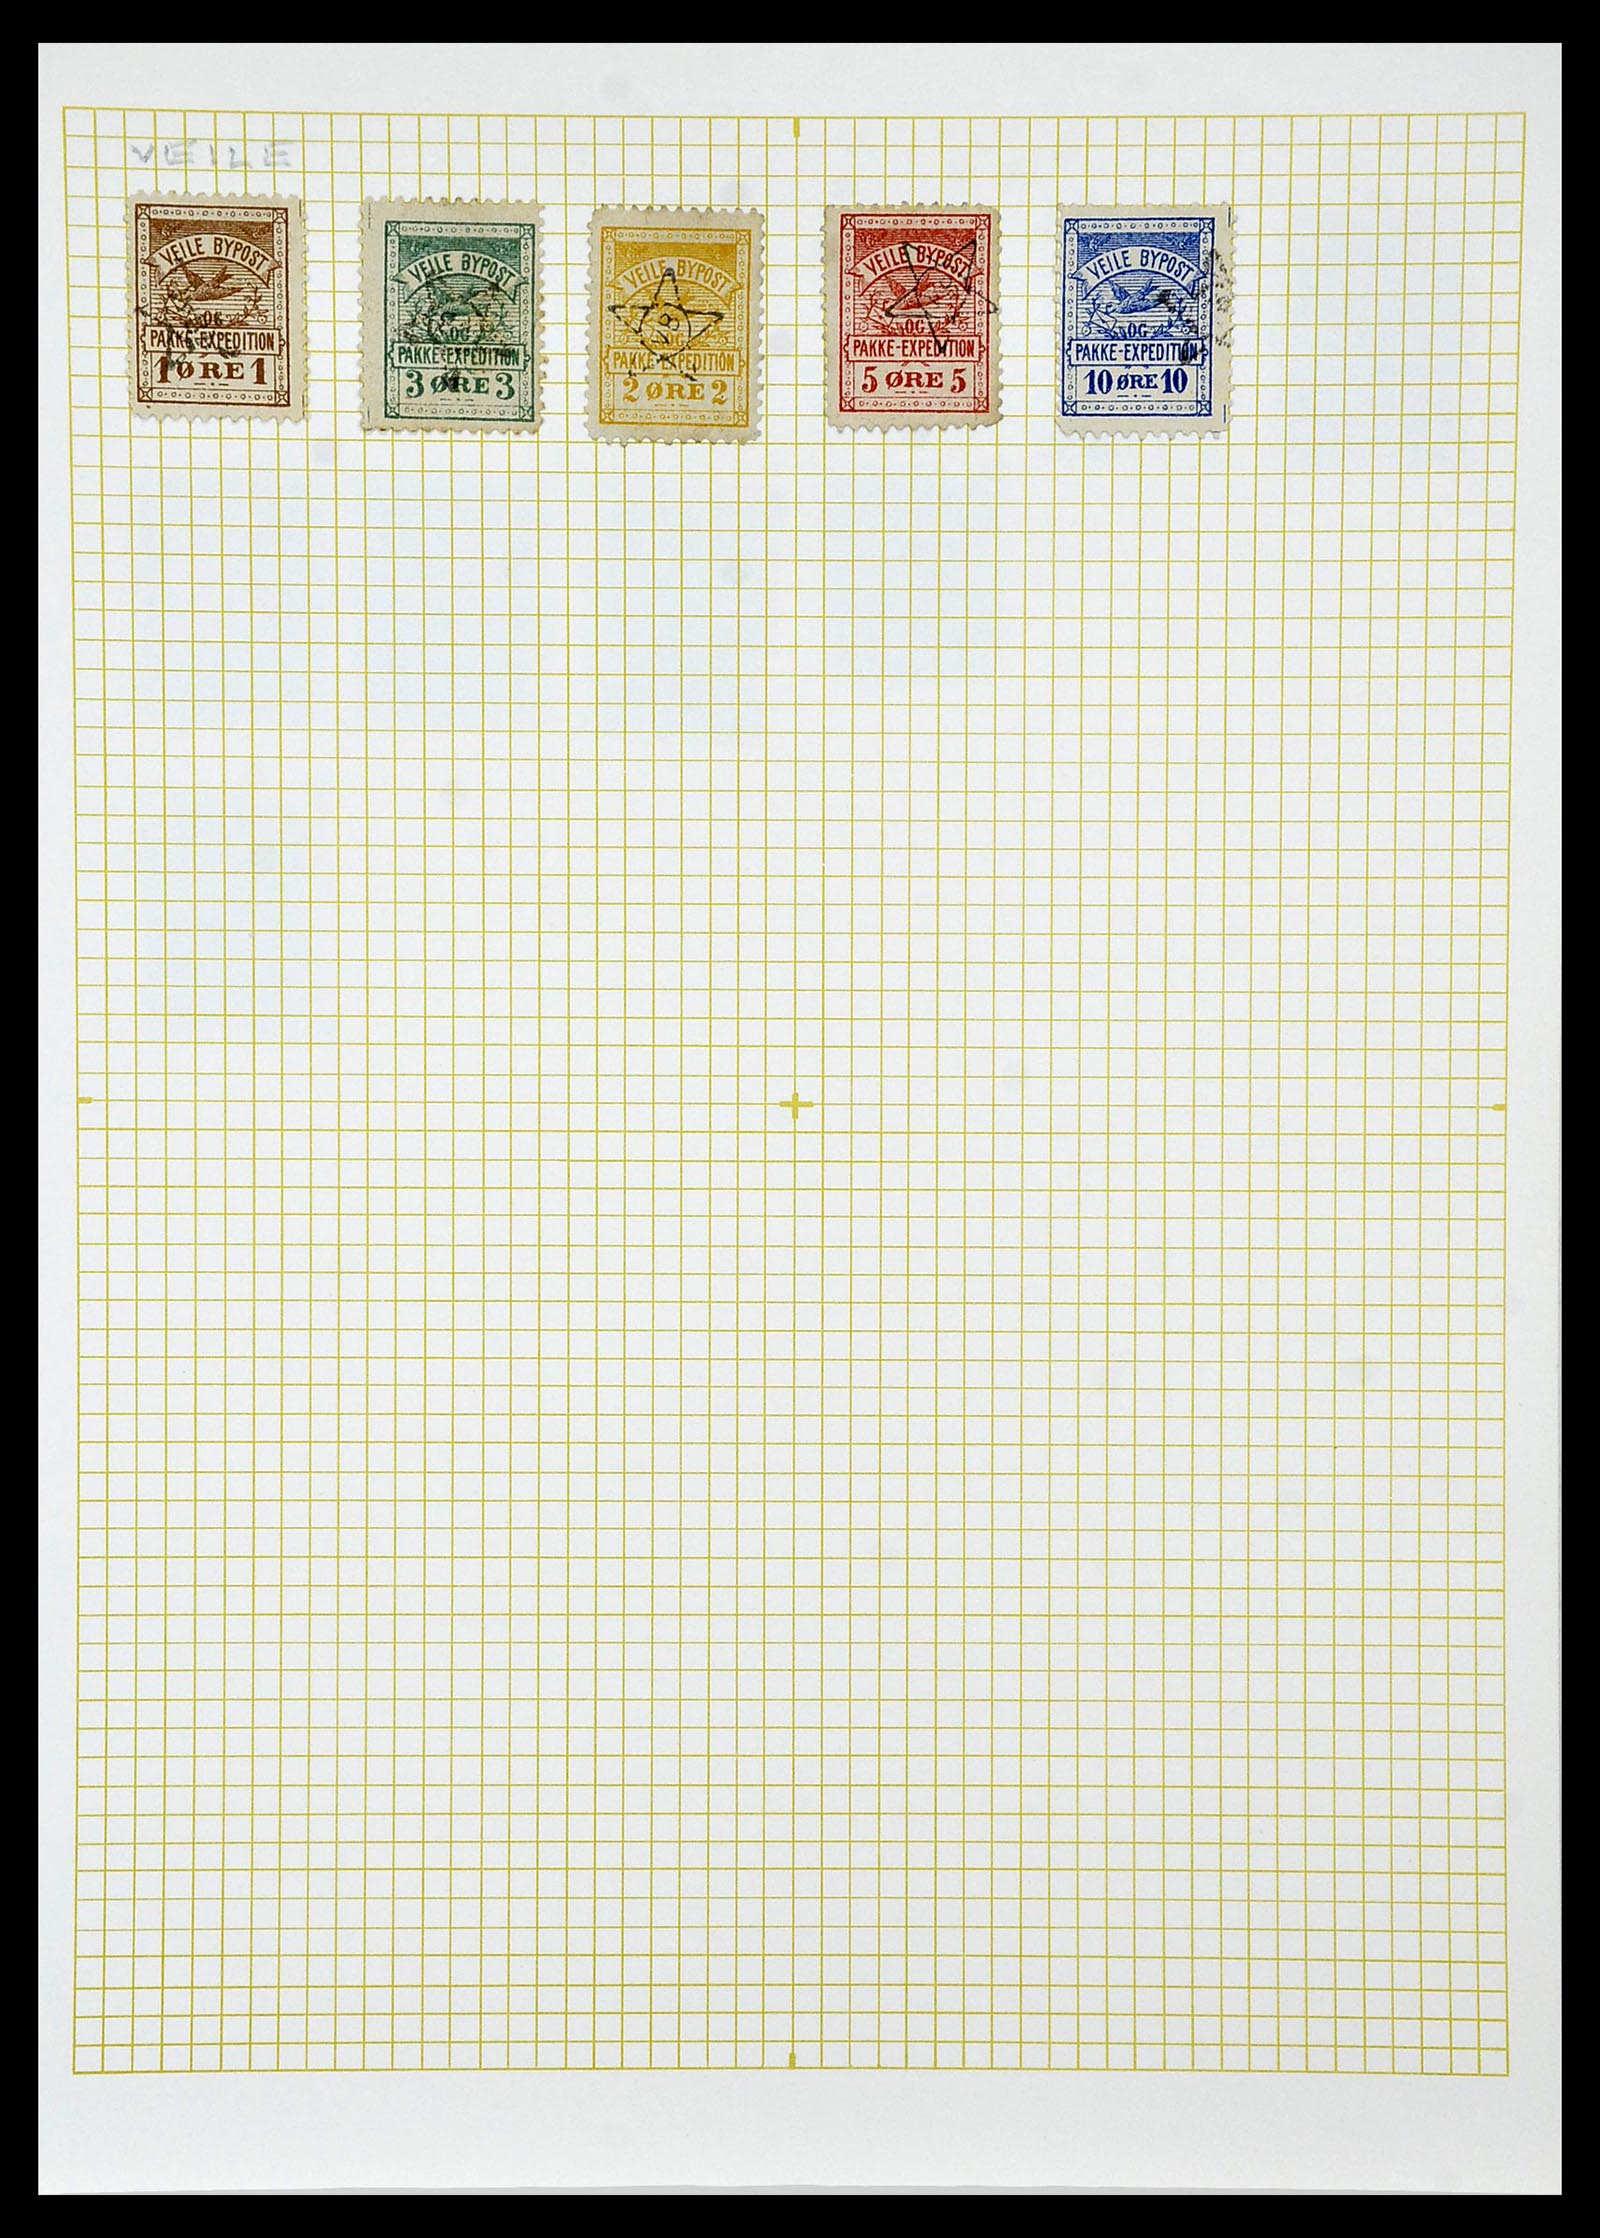 34344 023 - Stamp collection 34344 Scandinavia local post.